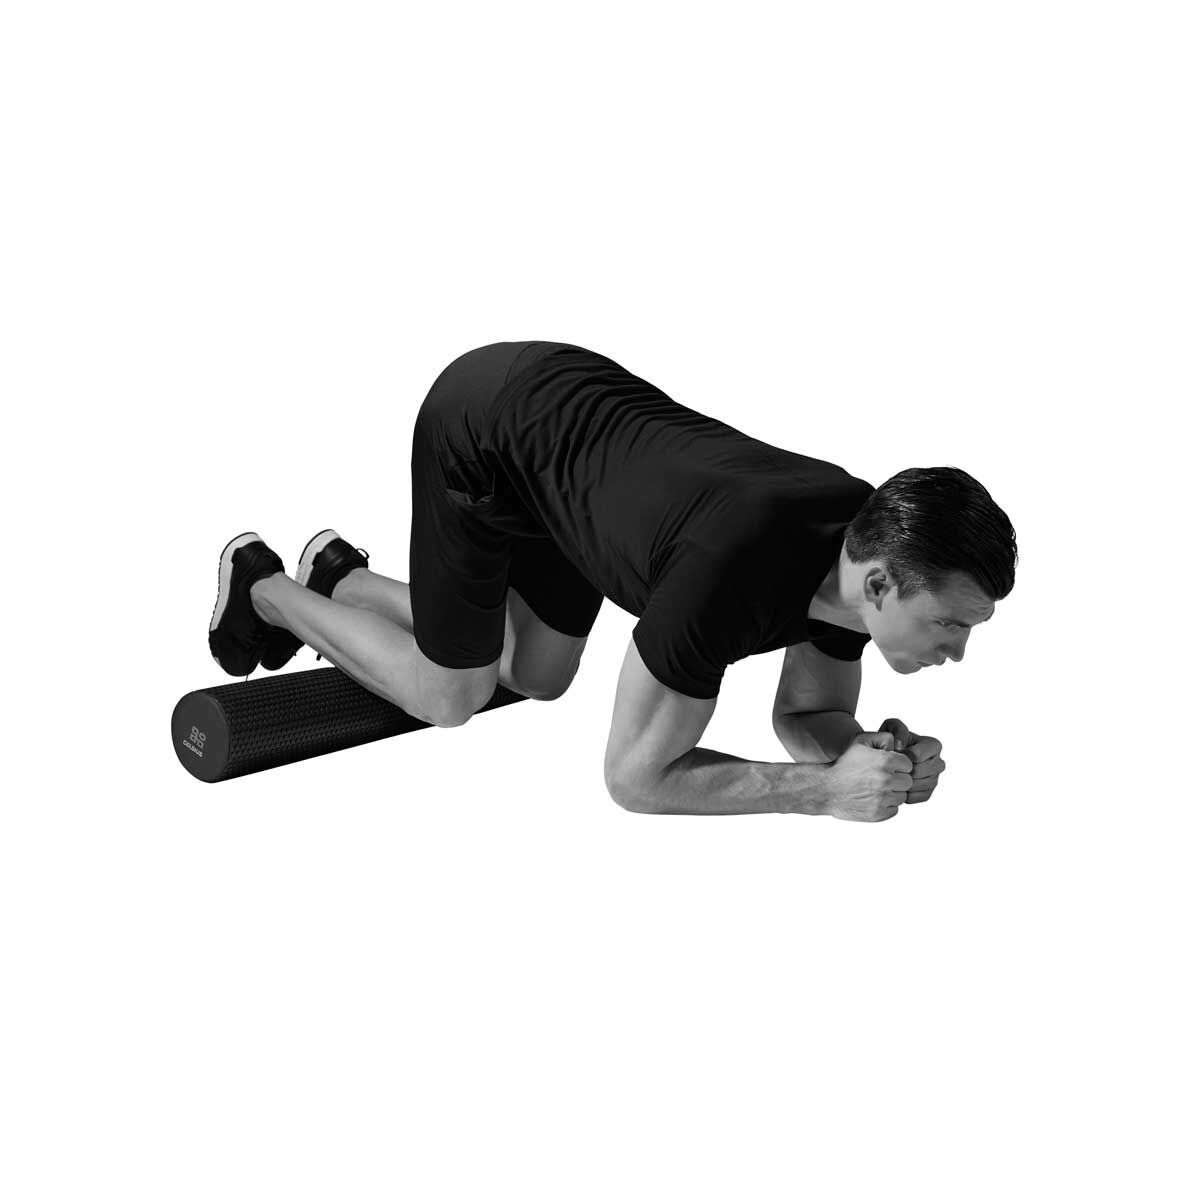 Foam Roller: Buy Exercise Roller/Foam Roller for Home Workout - Cube Club –  thecubeclub